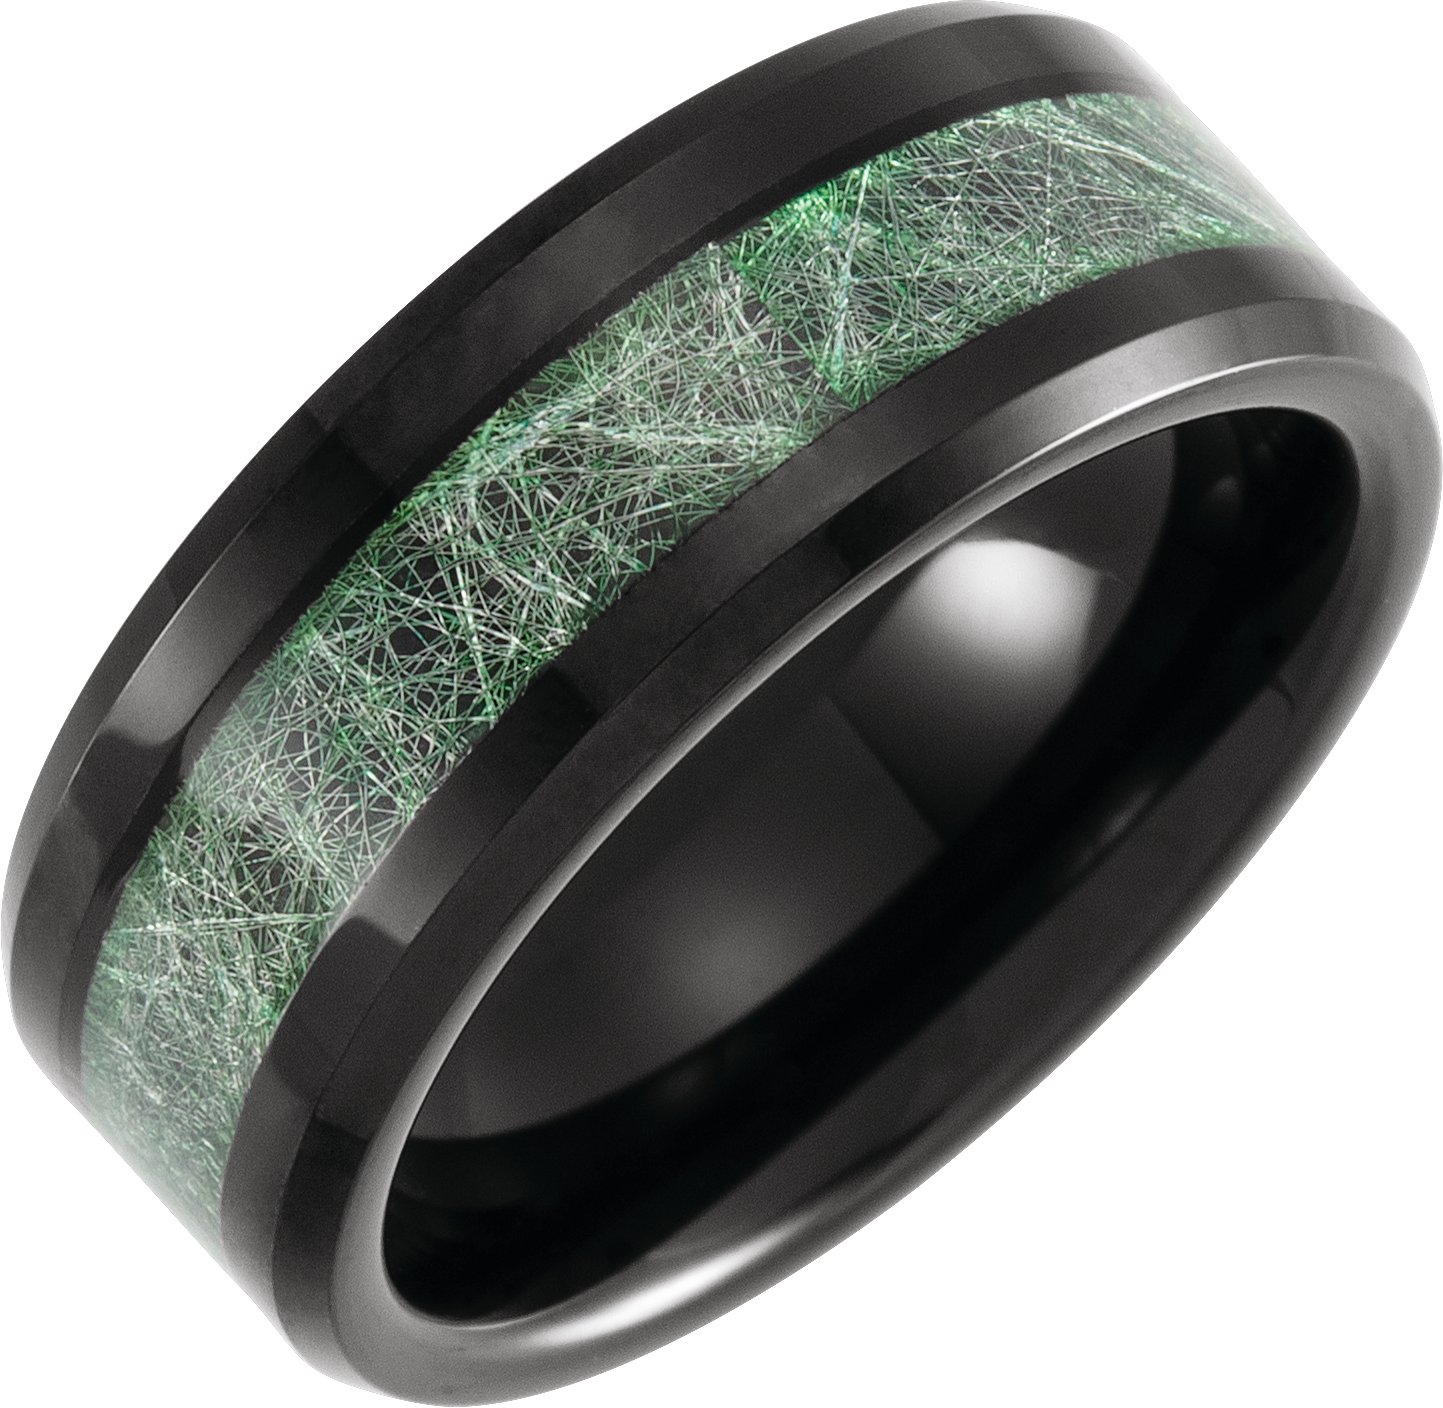 Tungsten 8 mm Beveled Band with Imitation Meteorite Inlay Size 13.5